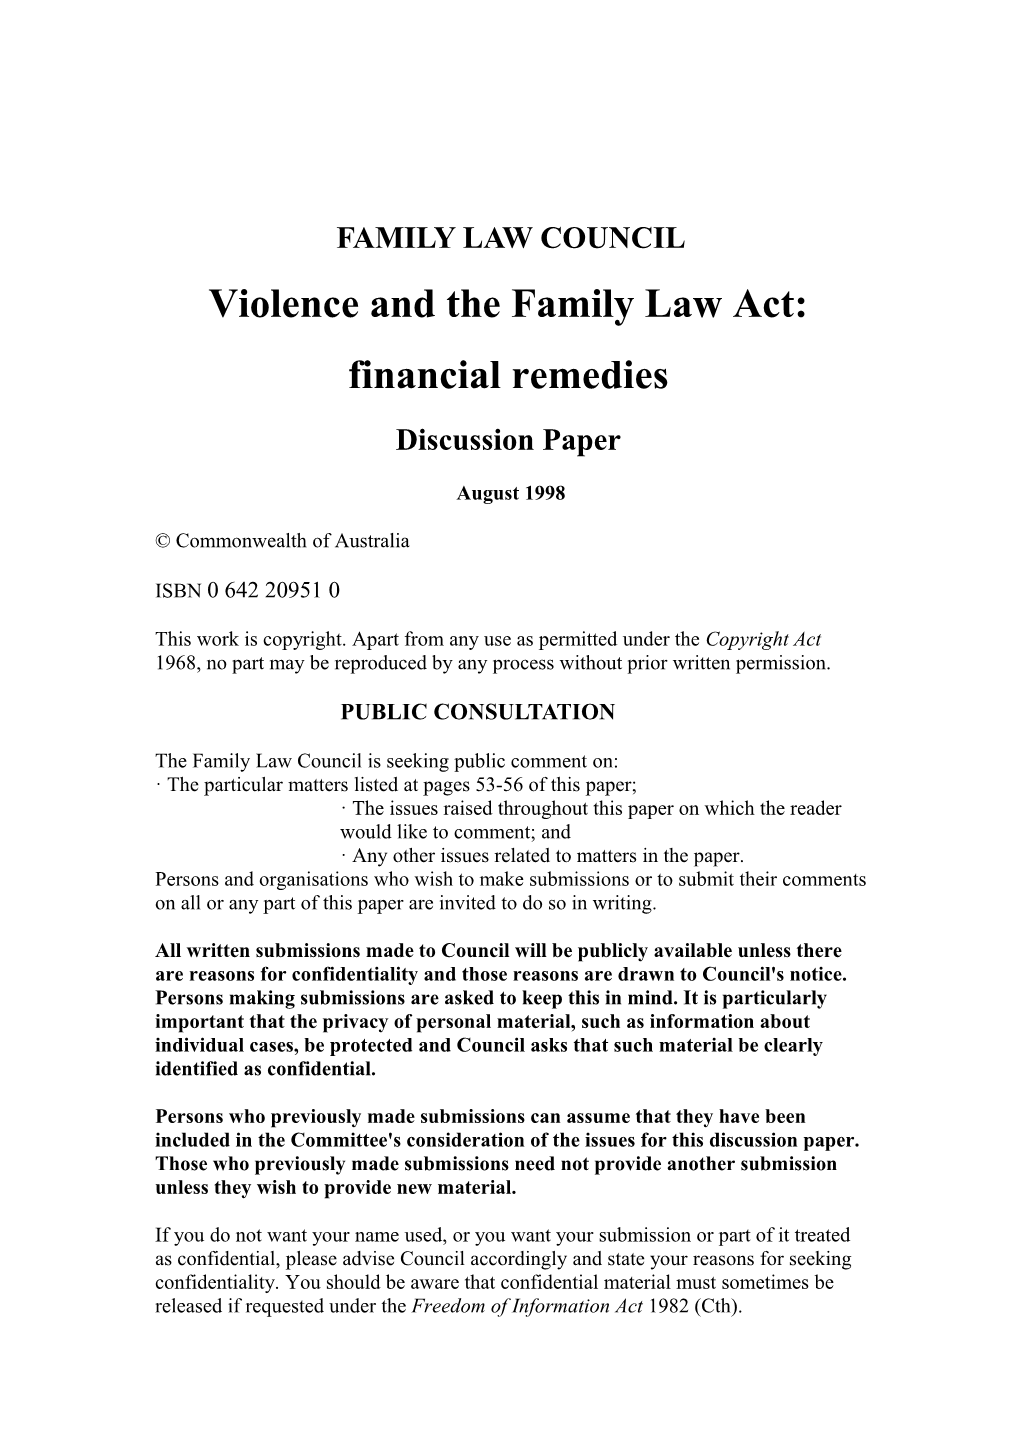 Violence and the Family Law Act